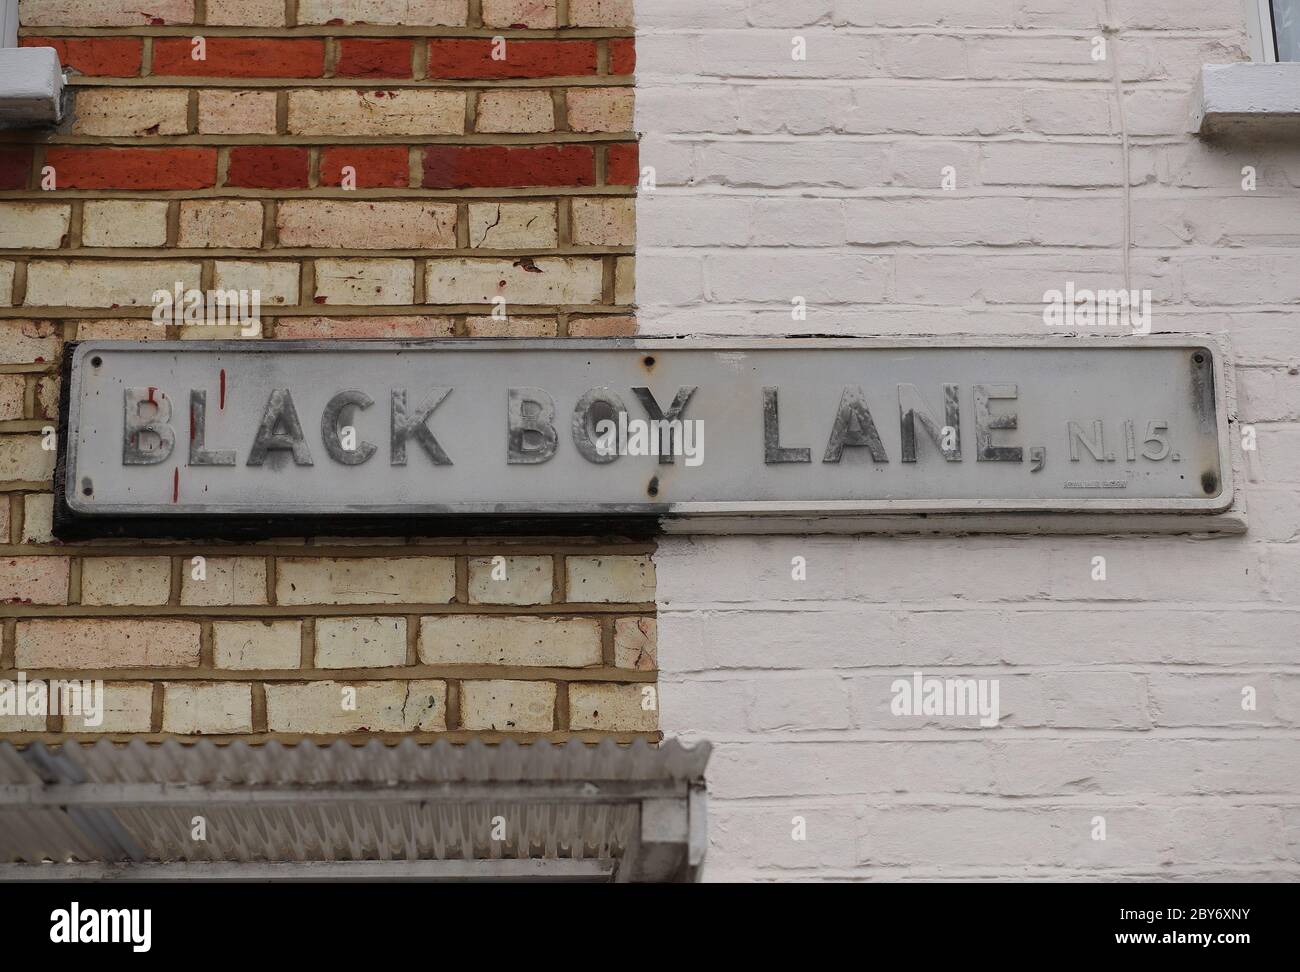 The street sign for Black Boy Lane in north London, as London mayor Sadiq Khan said that London's landmarks Ð including street names, the names of public buildings and plaques Ð will be reviewed to ensure they reflect the capital's diversity after protesters tore down a statue of slave trader Edward Colston in Bristol. Stock Photo